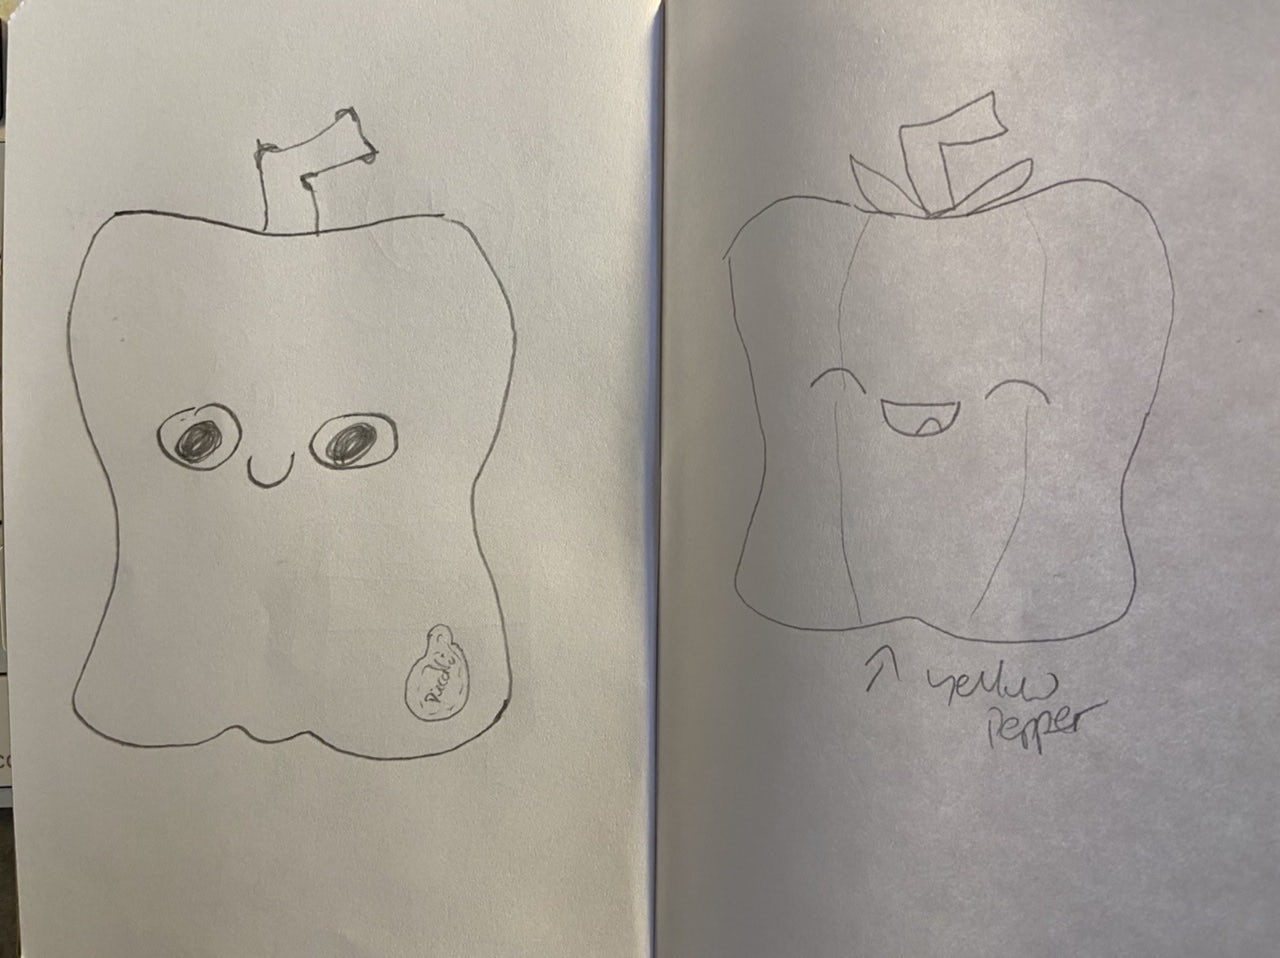 A two page spread in my notebook has two awful drawings of peppers